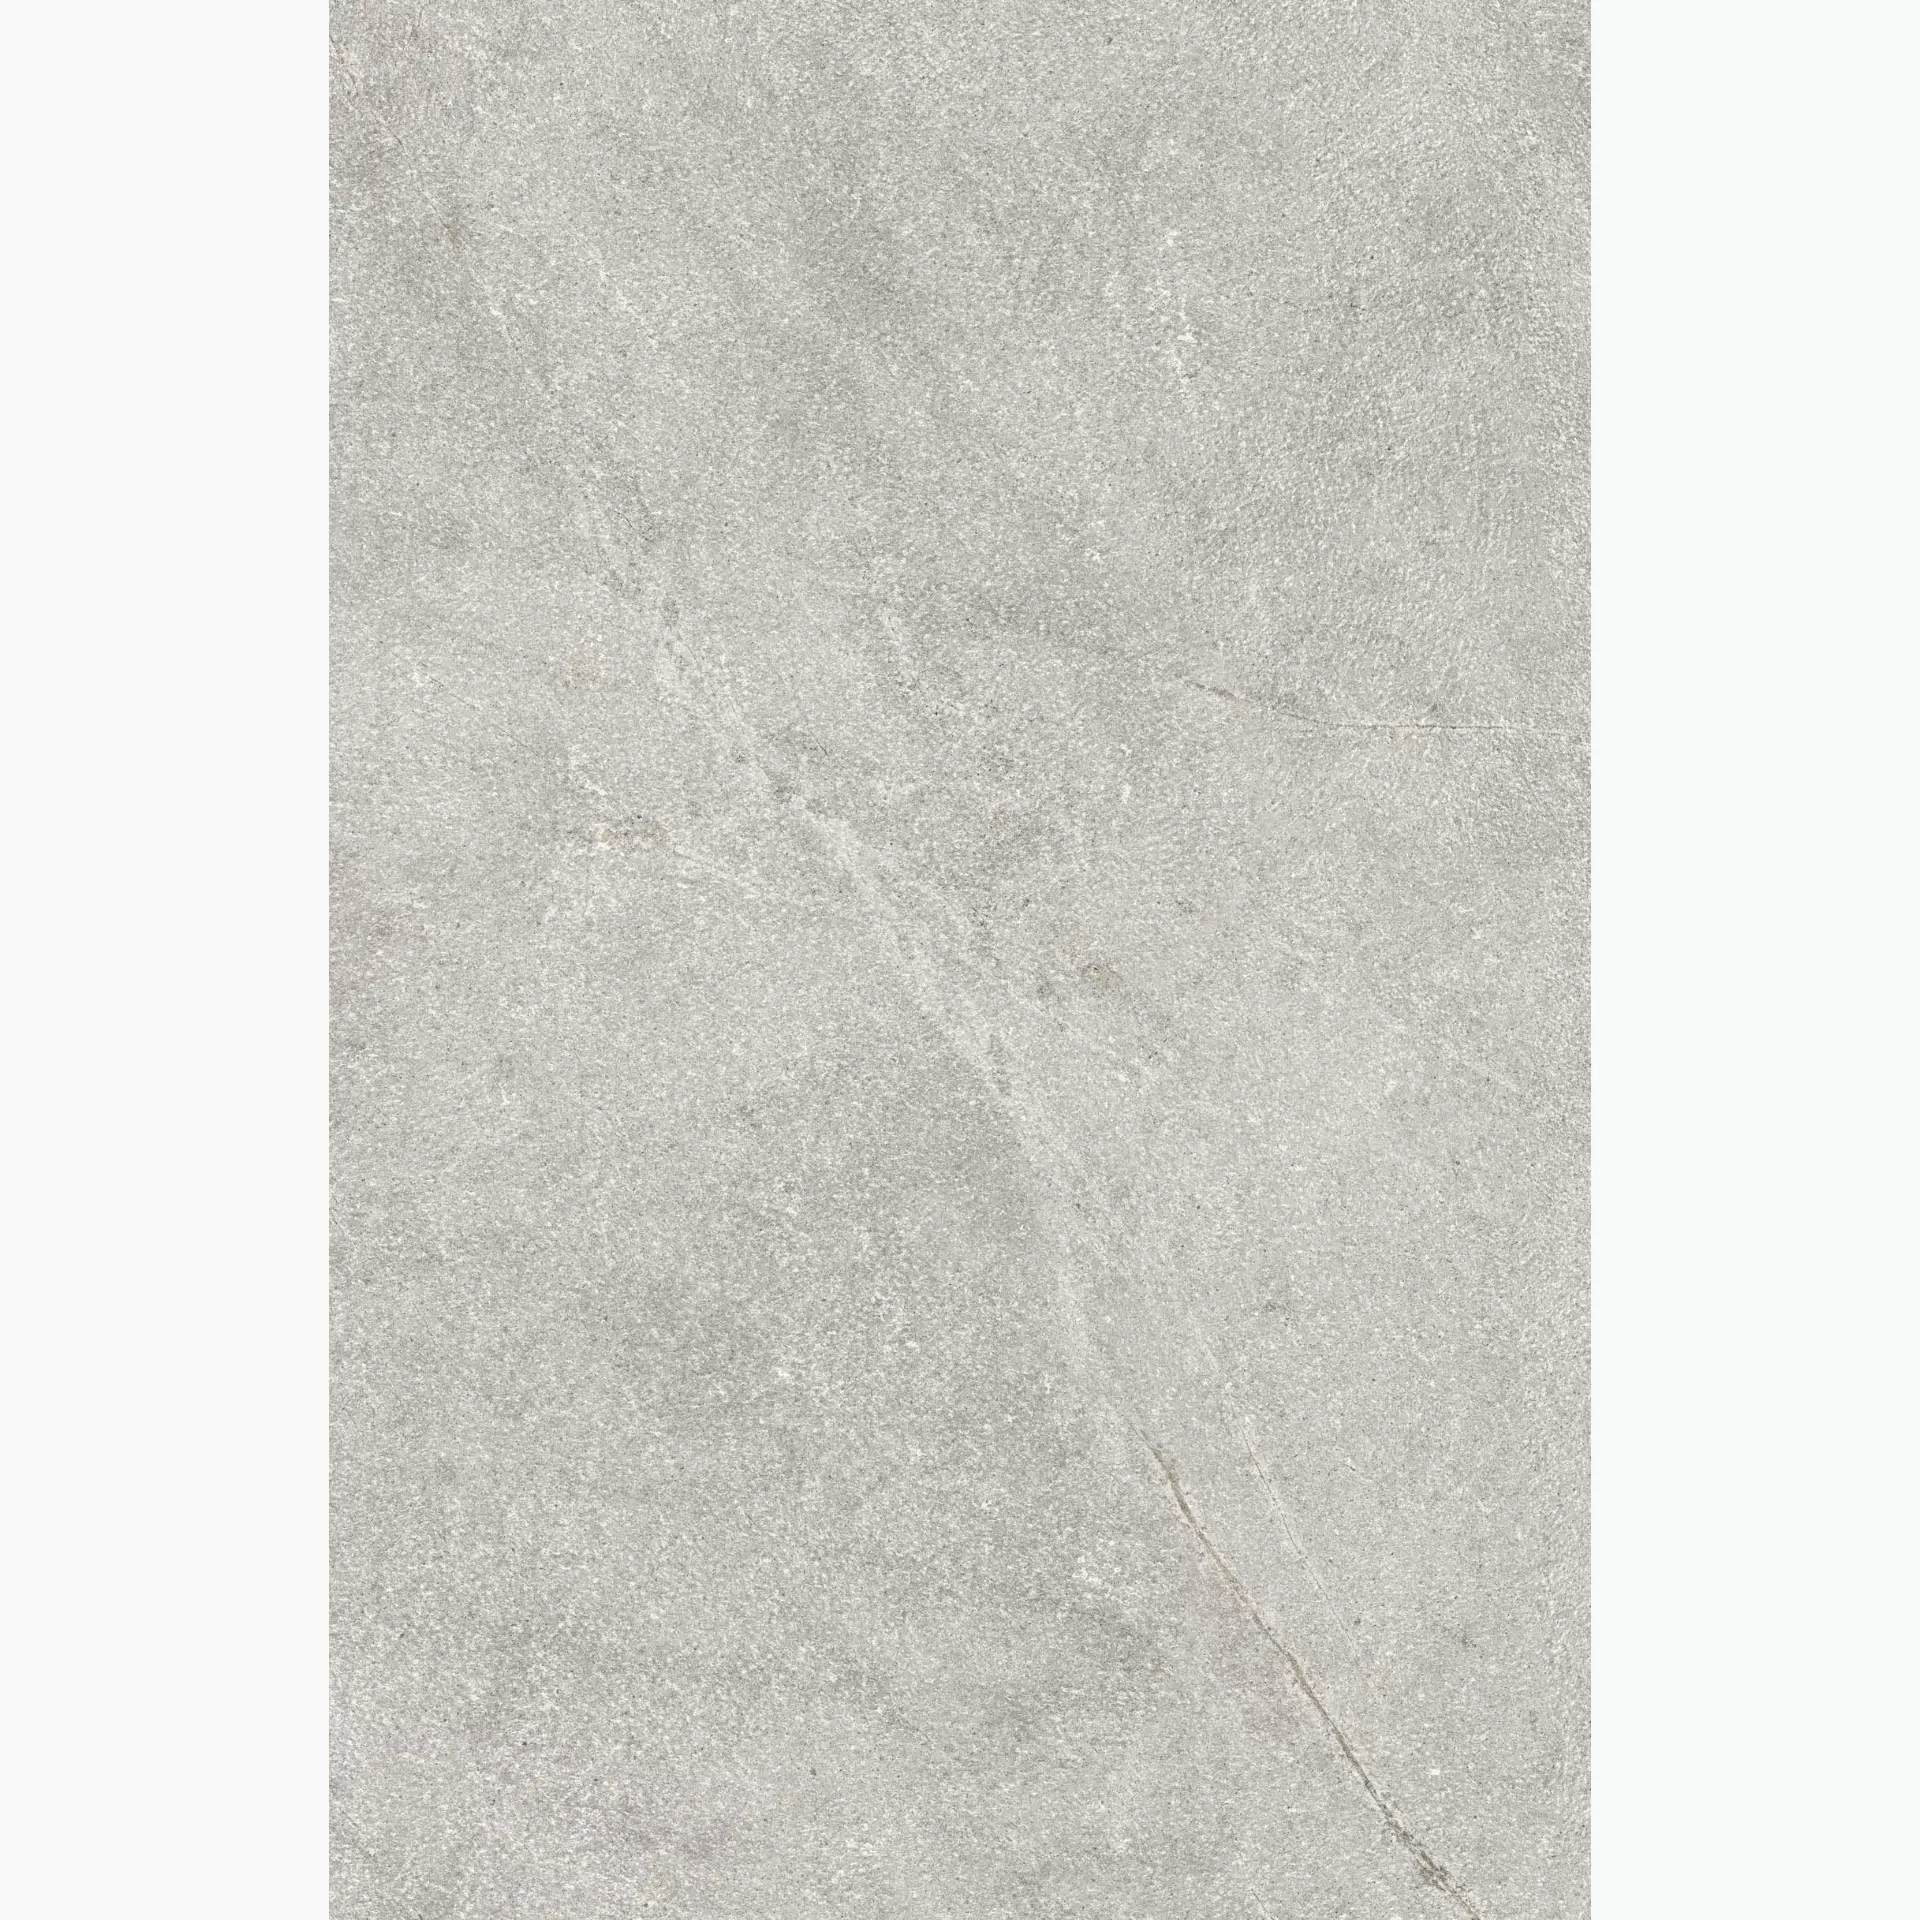 ABK Out.20 Atlantis Moon Hammered - Outdoor PF60007780 60x90cm rectified 20mm